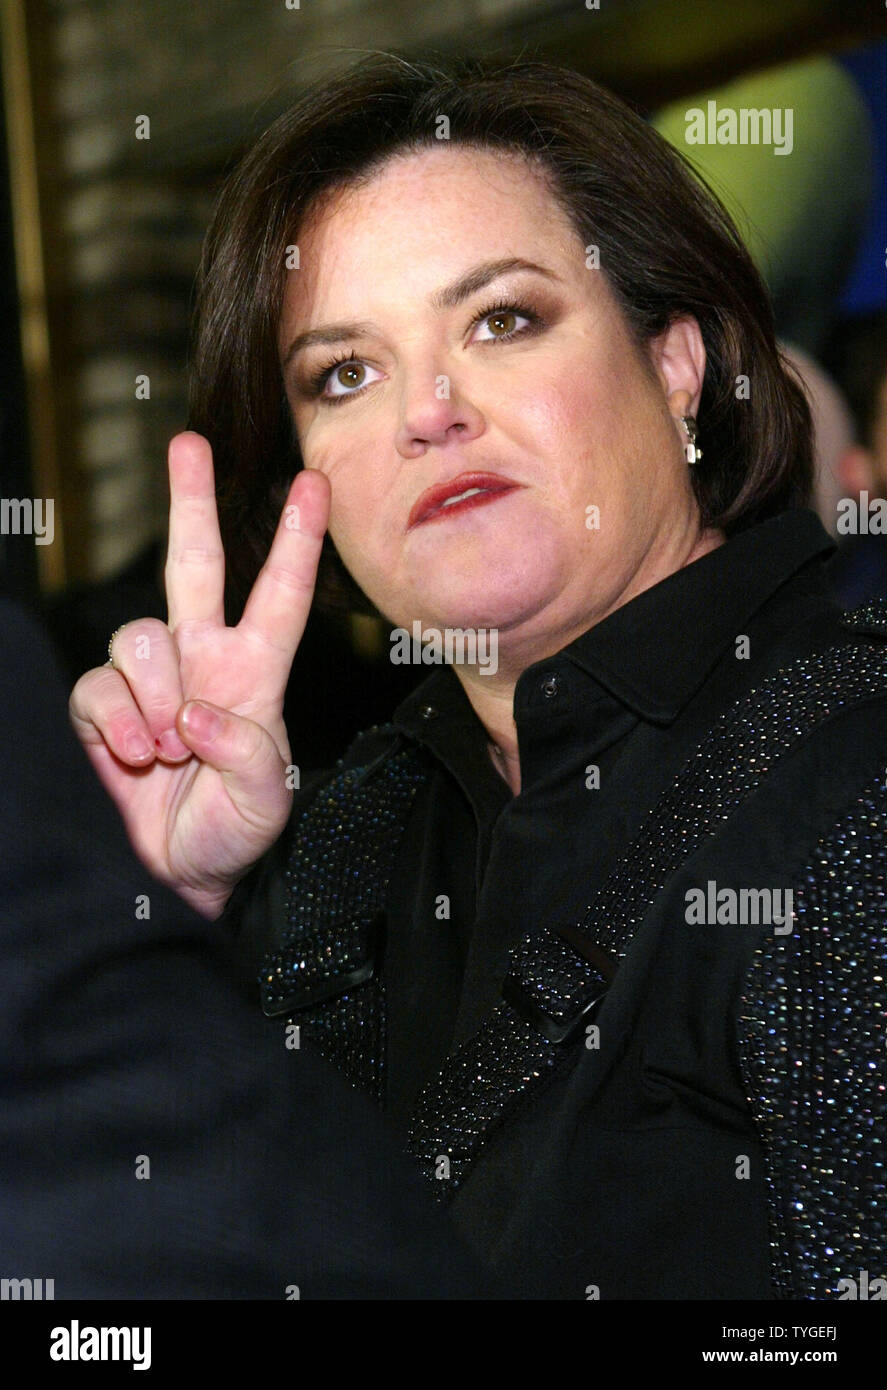 Former talk-show host and comedian Rosie O'Donnell gives the 'peace sign' as she arrives for  opening night of her Broadway production 'Taboo' on November 13, 2003 in New York City. The play, featuring Boy George, is about the counter culture of the 1980's.  (UPI/MONIKA GRAFF) Stock Photo